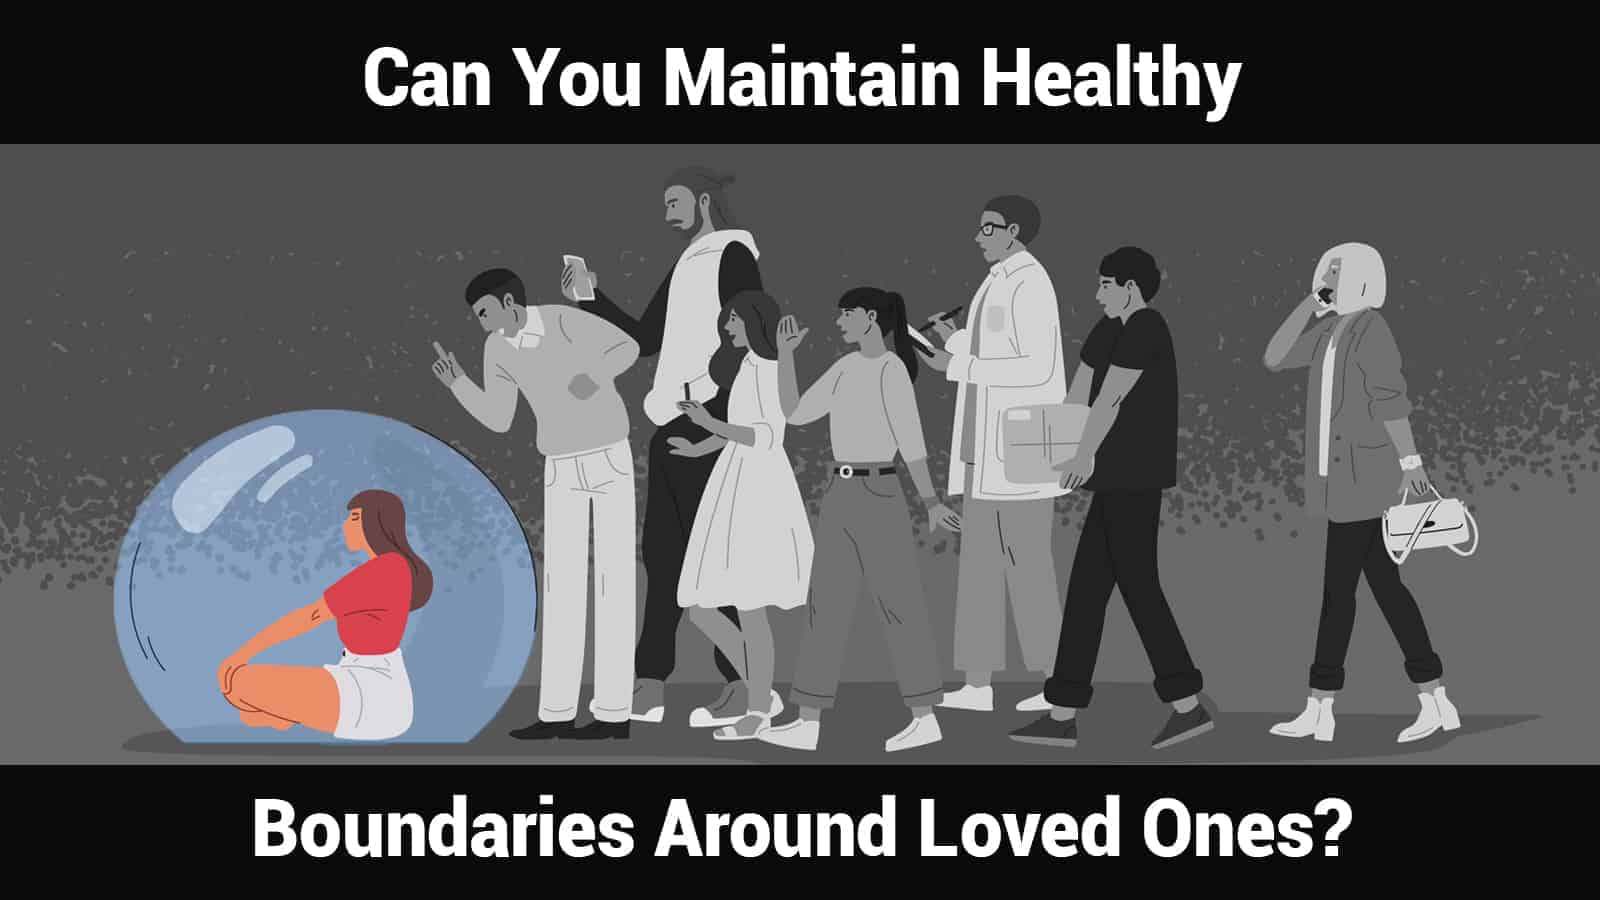 Can You Maintain Healthy Boundaries Around Loved Ones?